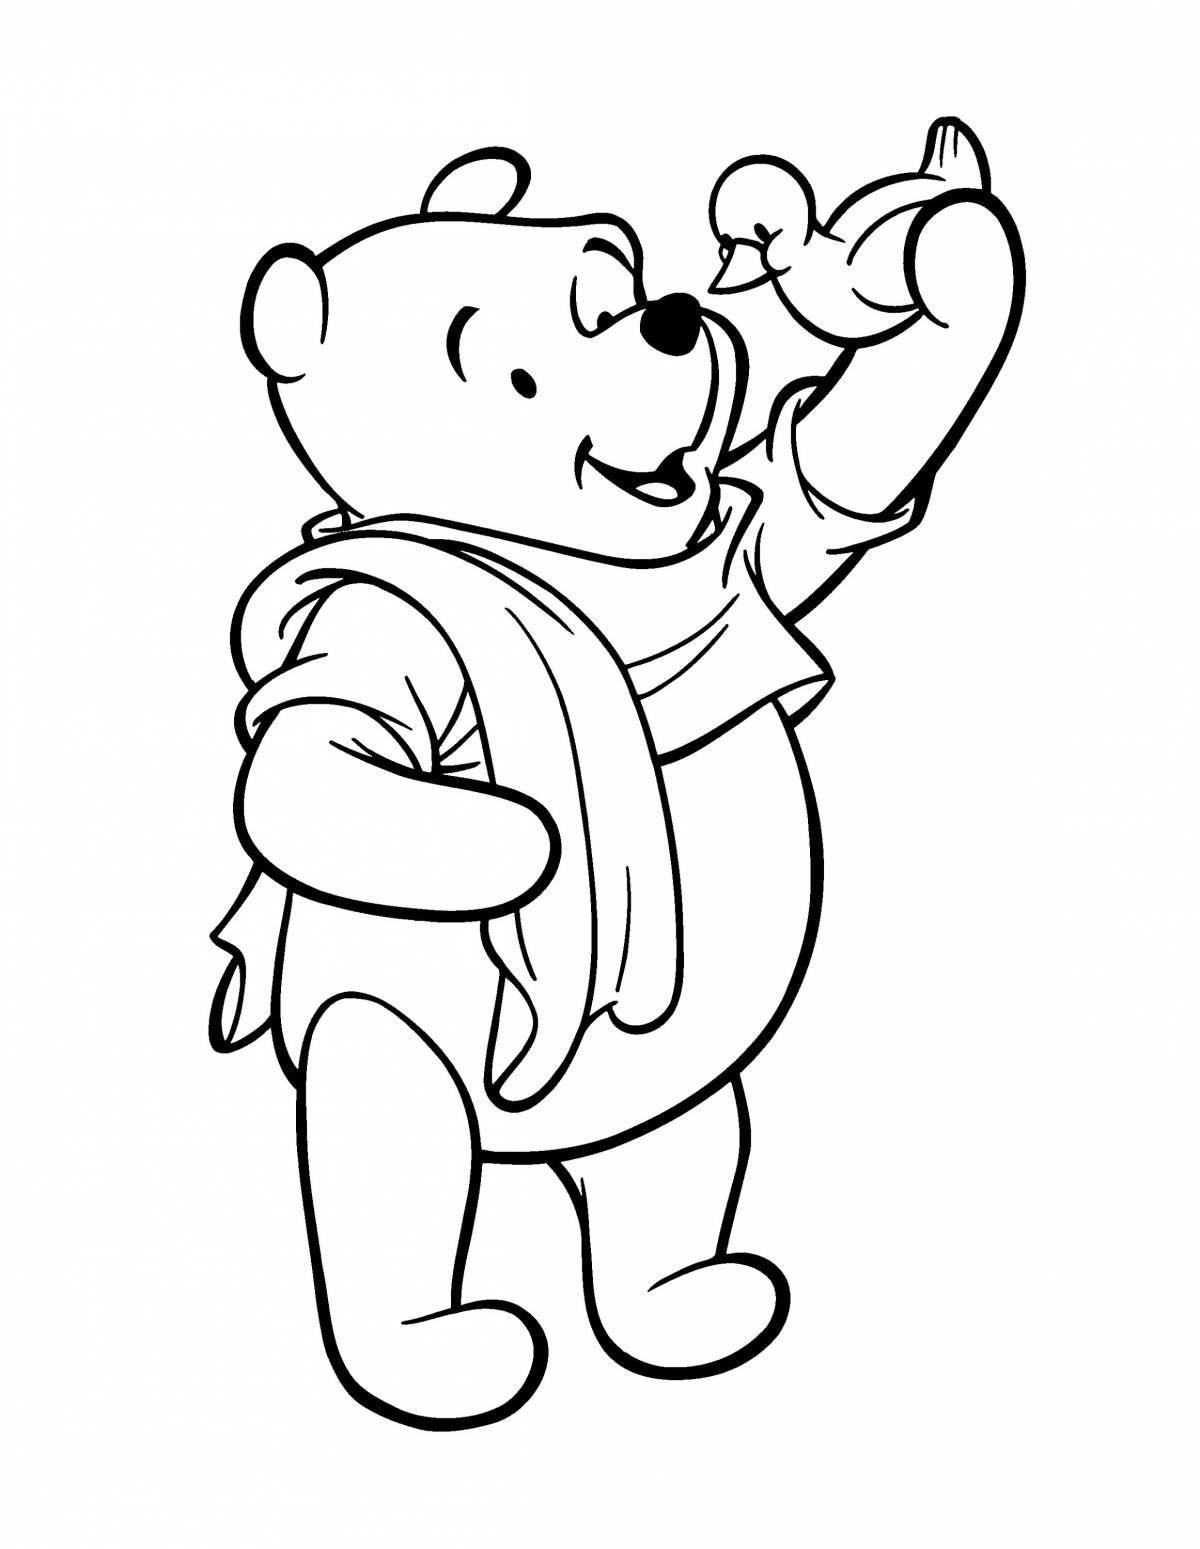 Colorful winnie the pooh coloring page